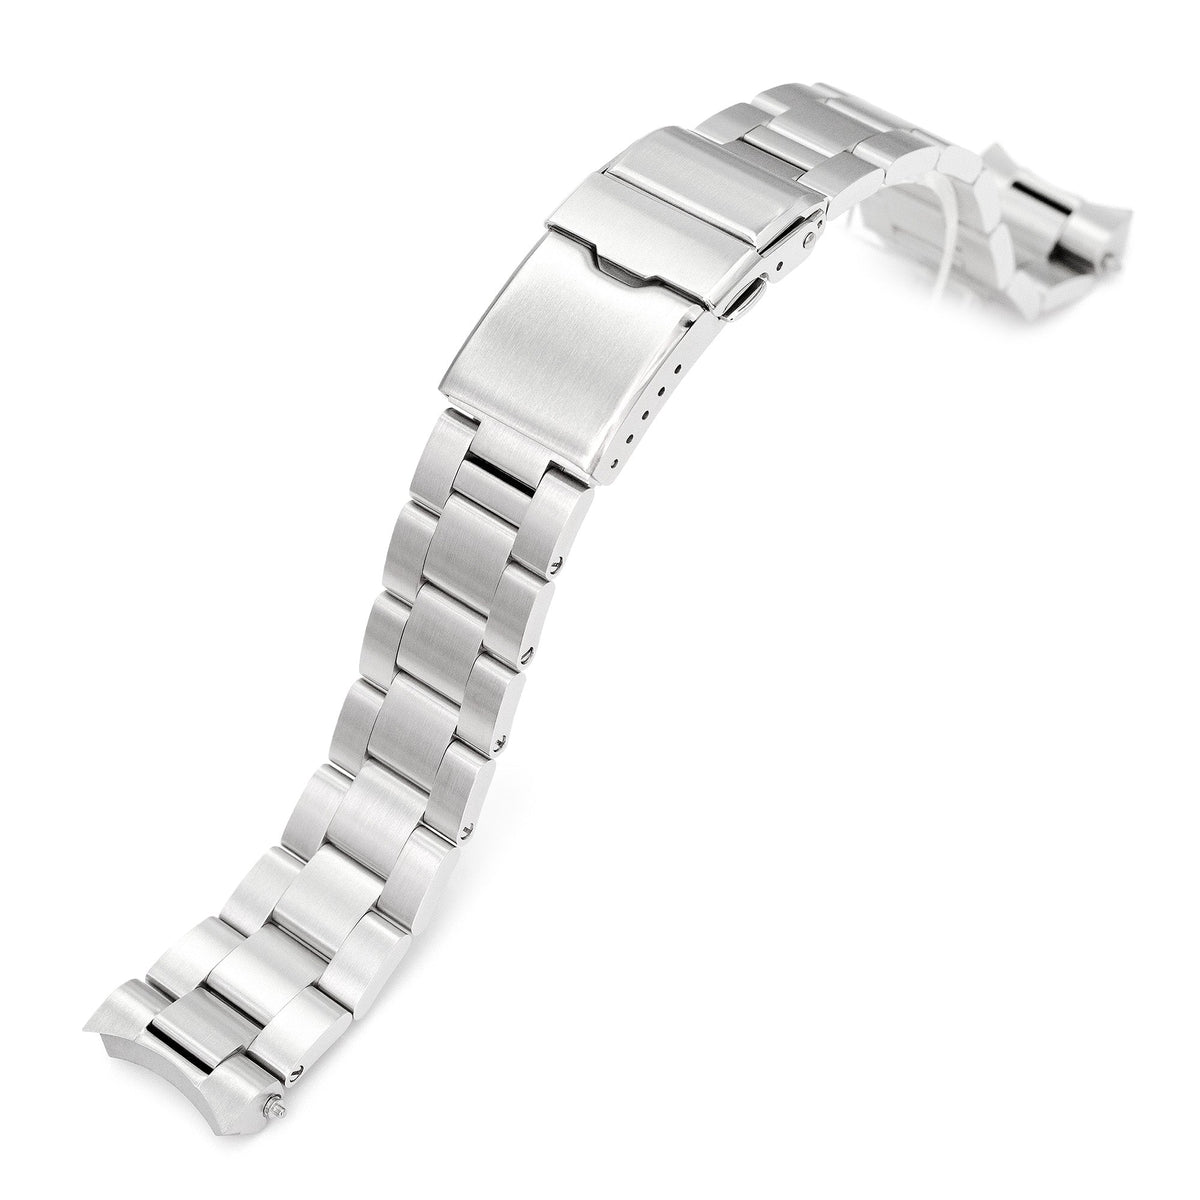 20mm Super Boyer Watch Band for Seiko SPB185, 316L Stainless Steel Brushed Baton Diver Clasp Strapcode watch bands